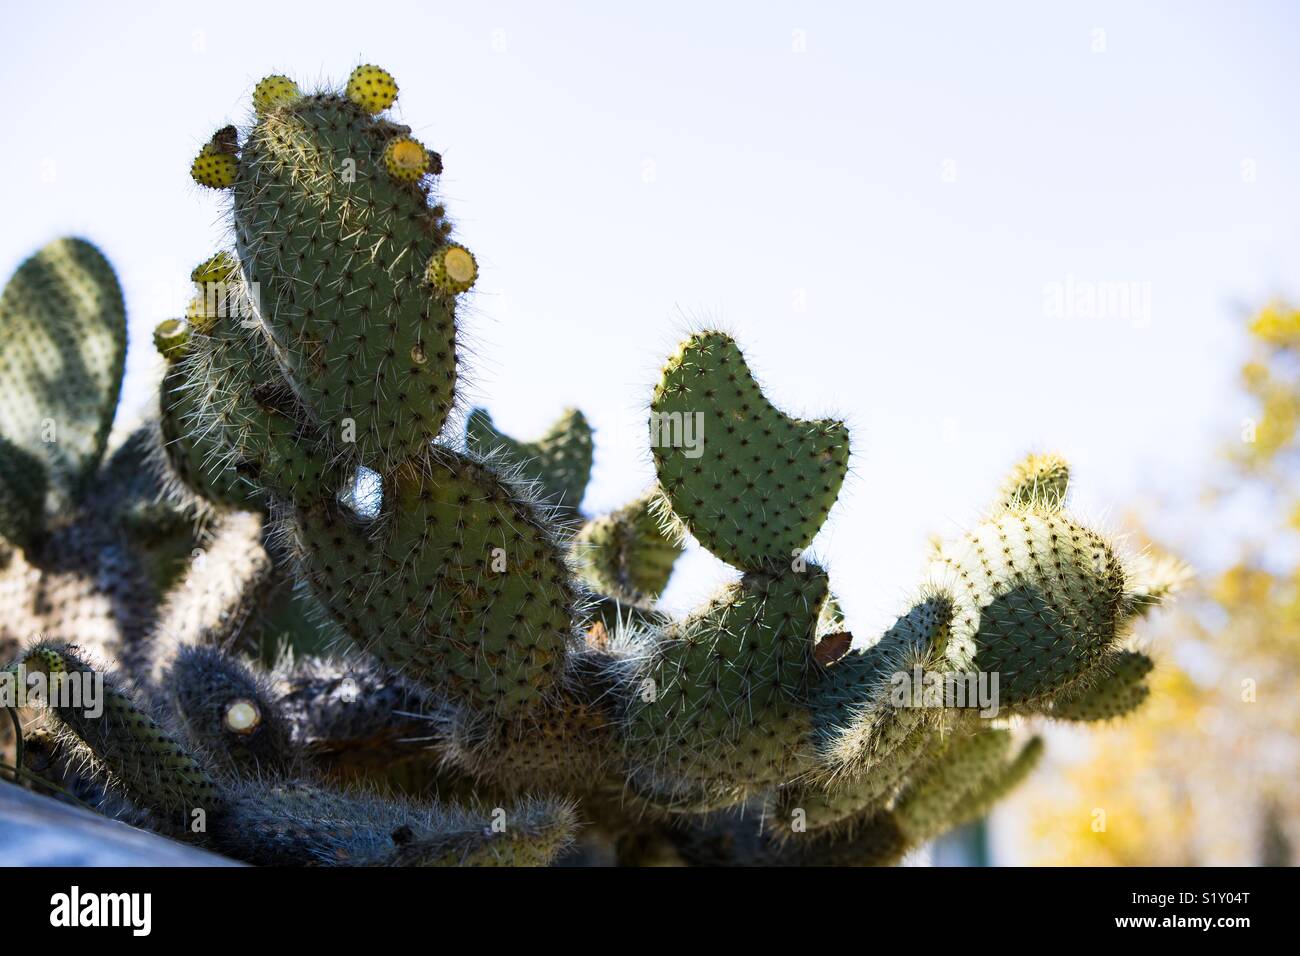 Prickly Pear.  Opuntia is a genus in the cactus family, Cactaceae. The most common culinary species is the Indian fig opuntia. Most culinary uses of the term 'prickly pear' refer to this species. Stock Photo